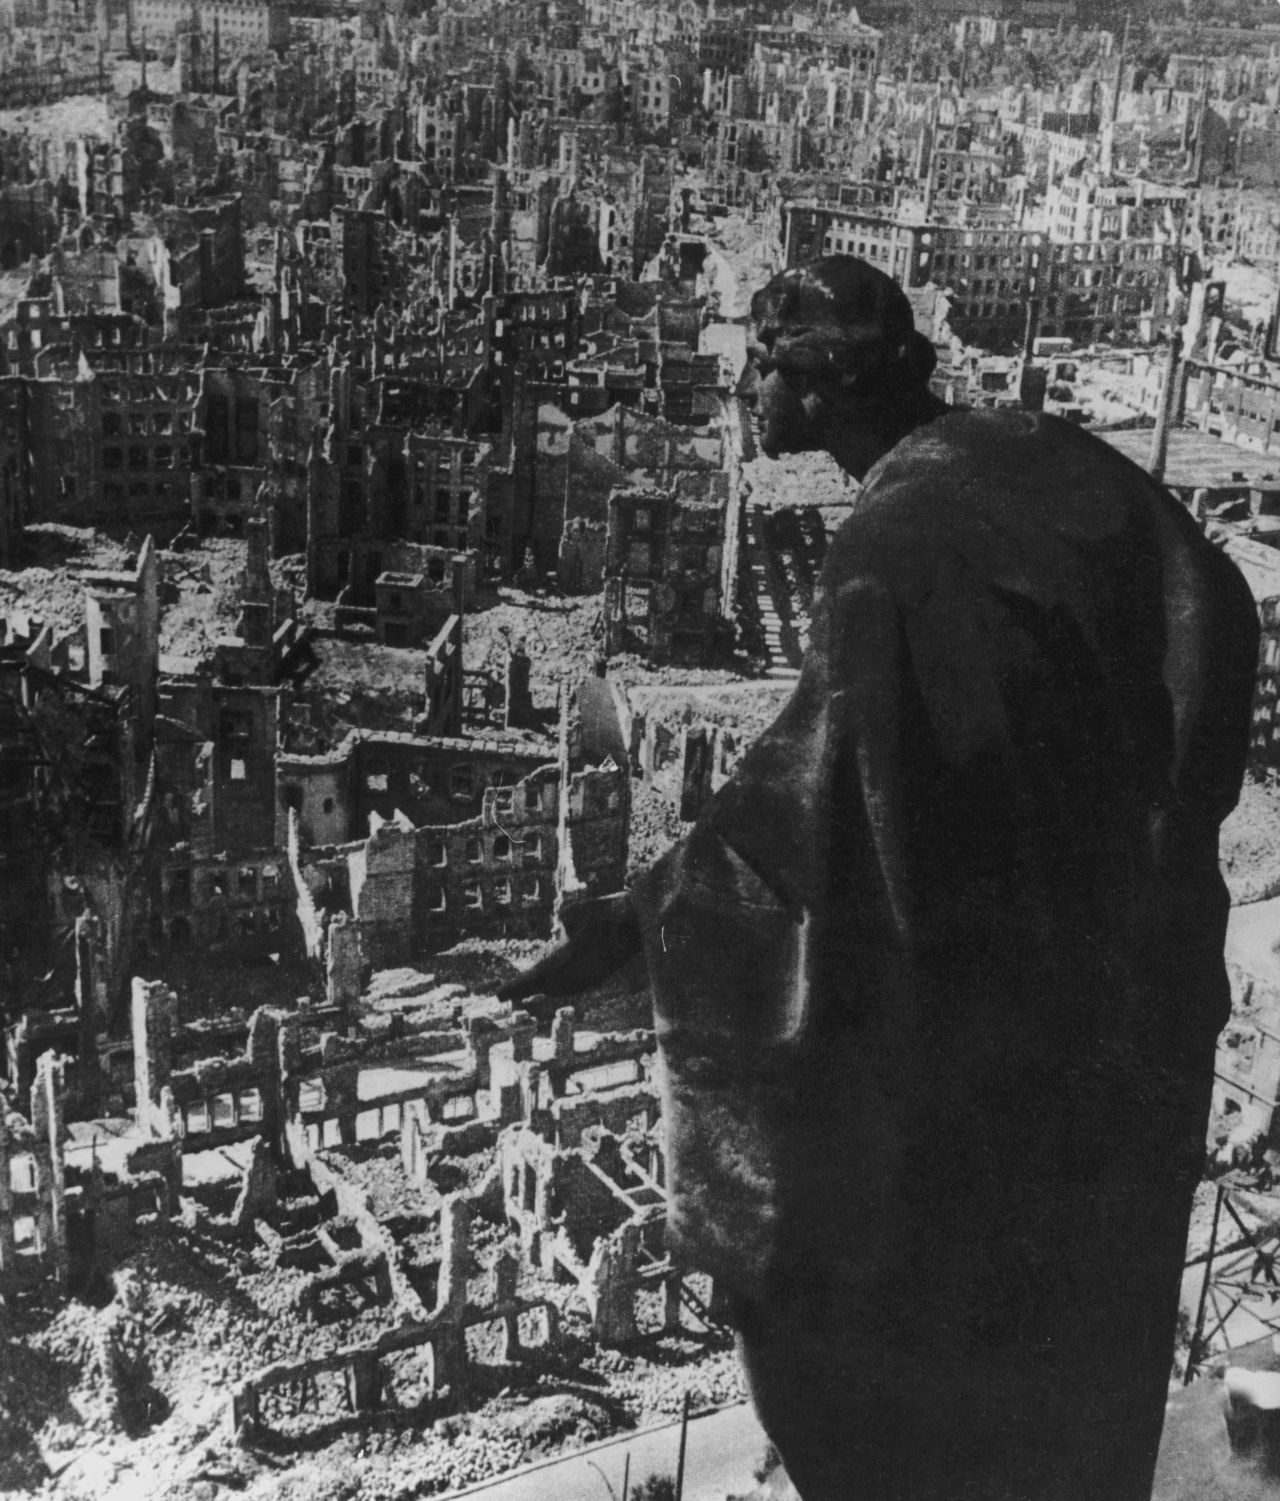 Germany was left devastated at the end of World War II -- but was able to start over from scratch, thanks to support from the Marshall Plan.